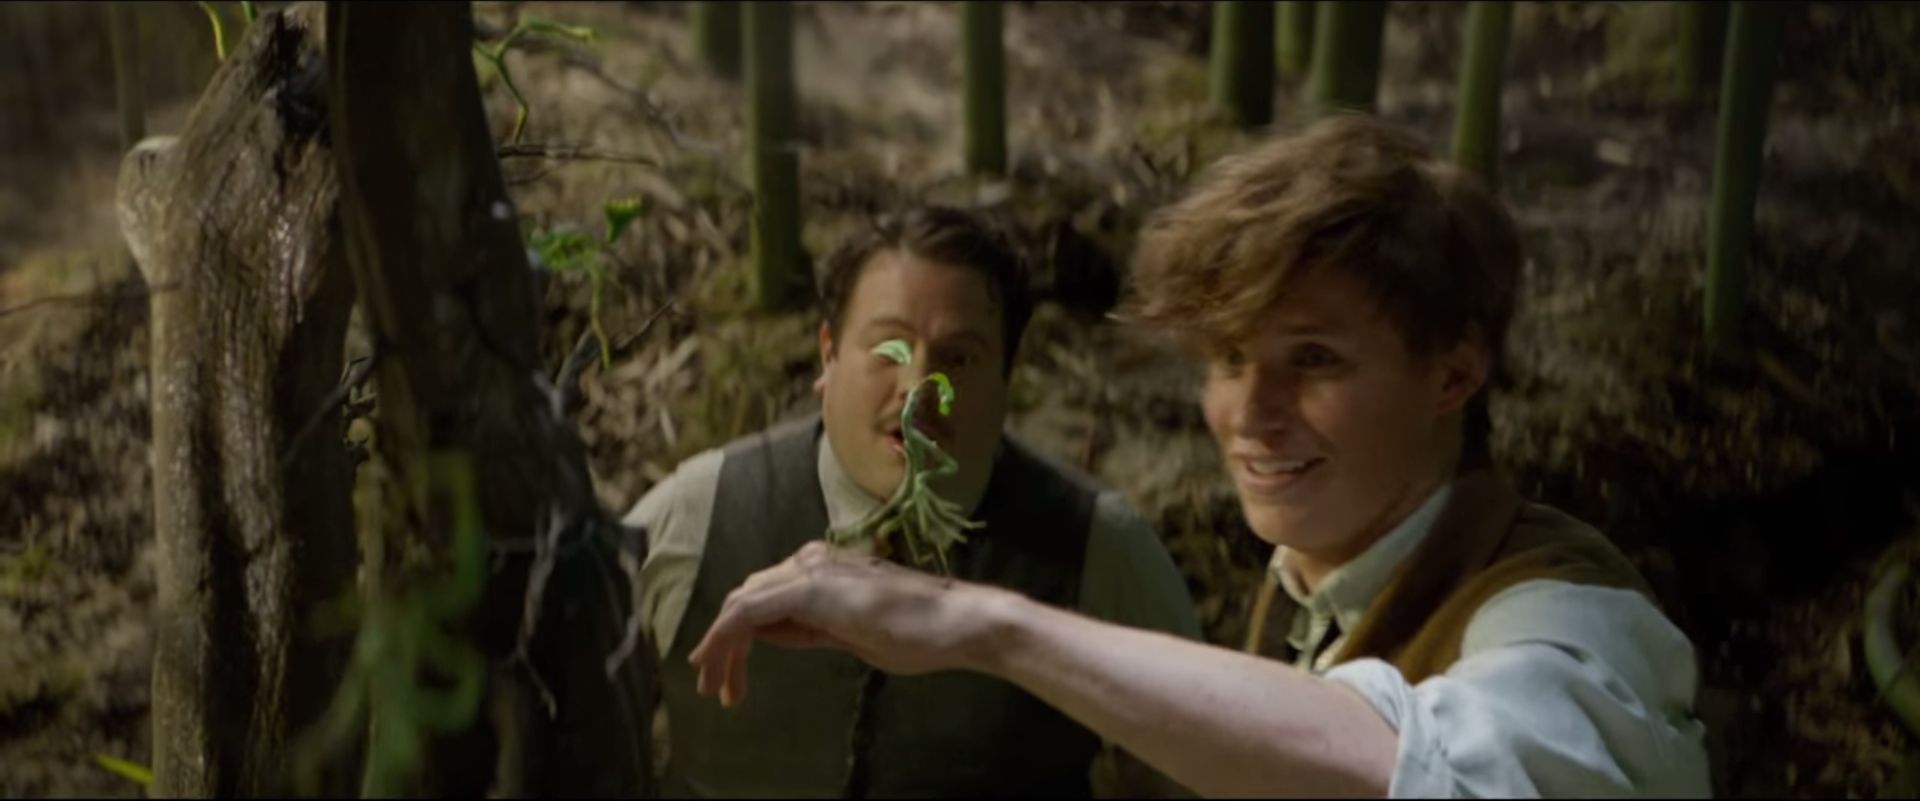 2016 Watch Fantastic Beasts And Where To Find Them Film Online